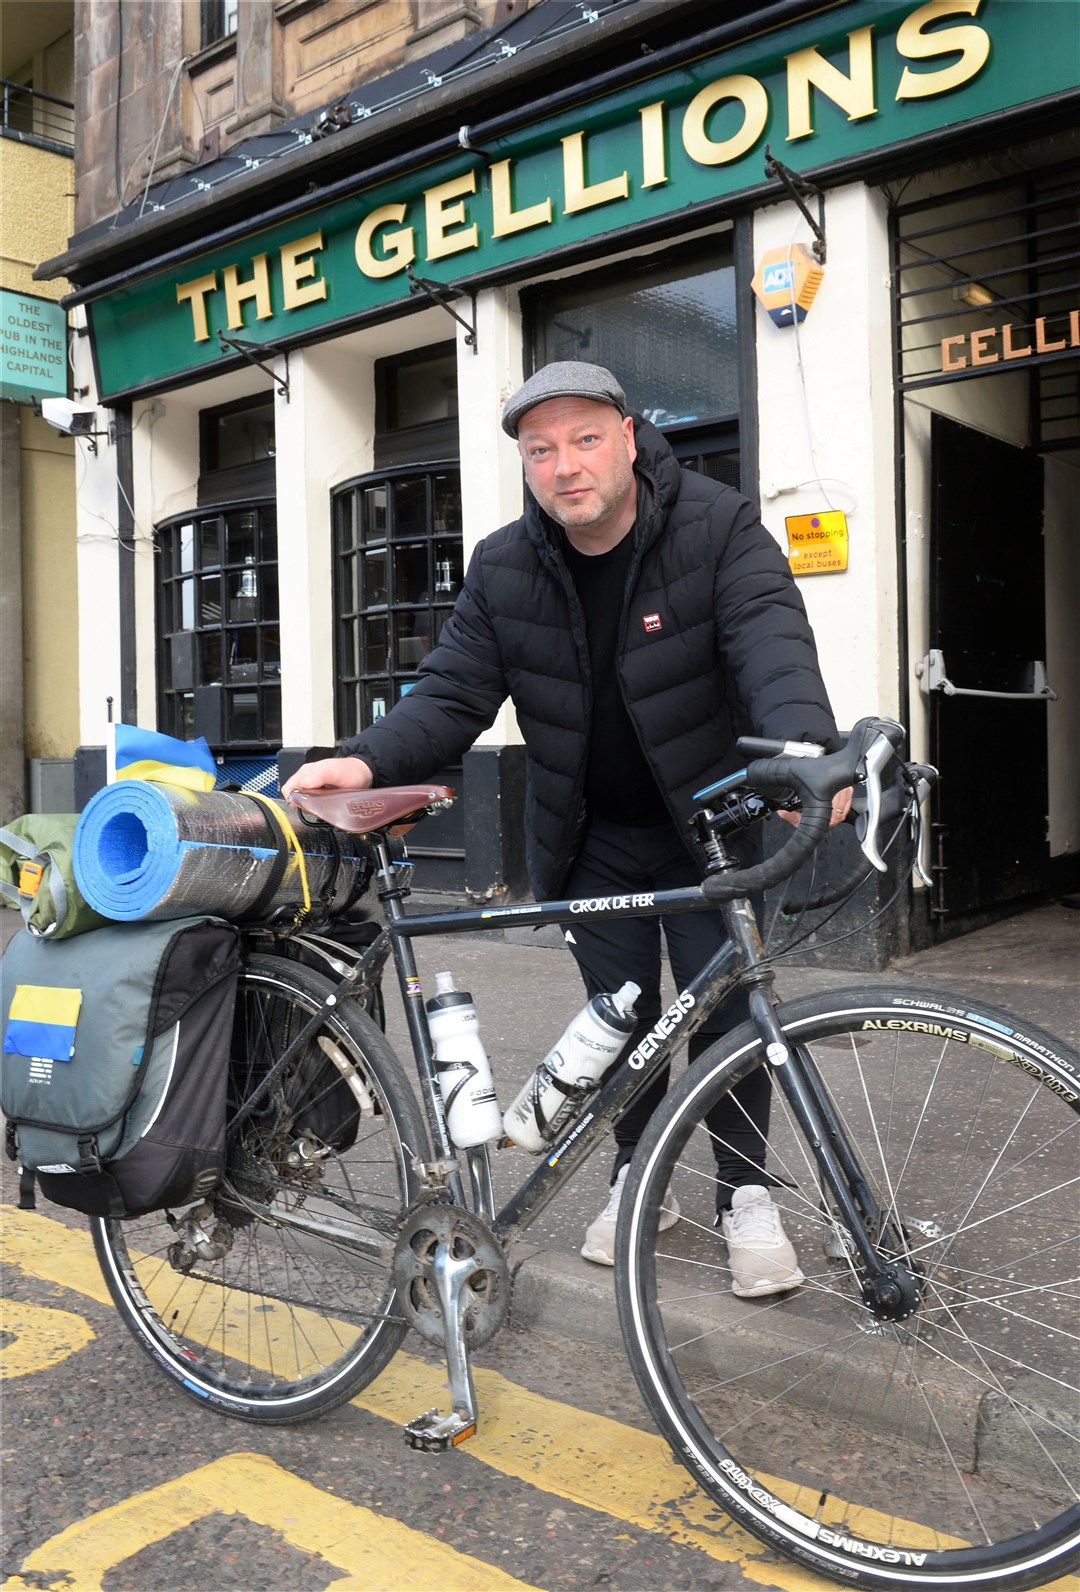 Alasdair Fraser before he set off for his Gdansk to The Gellions fundraising cycle for Urkraine. Picture: Gary Anthony